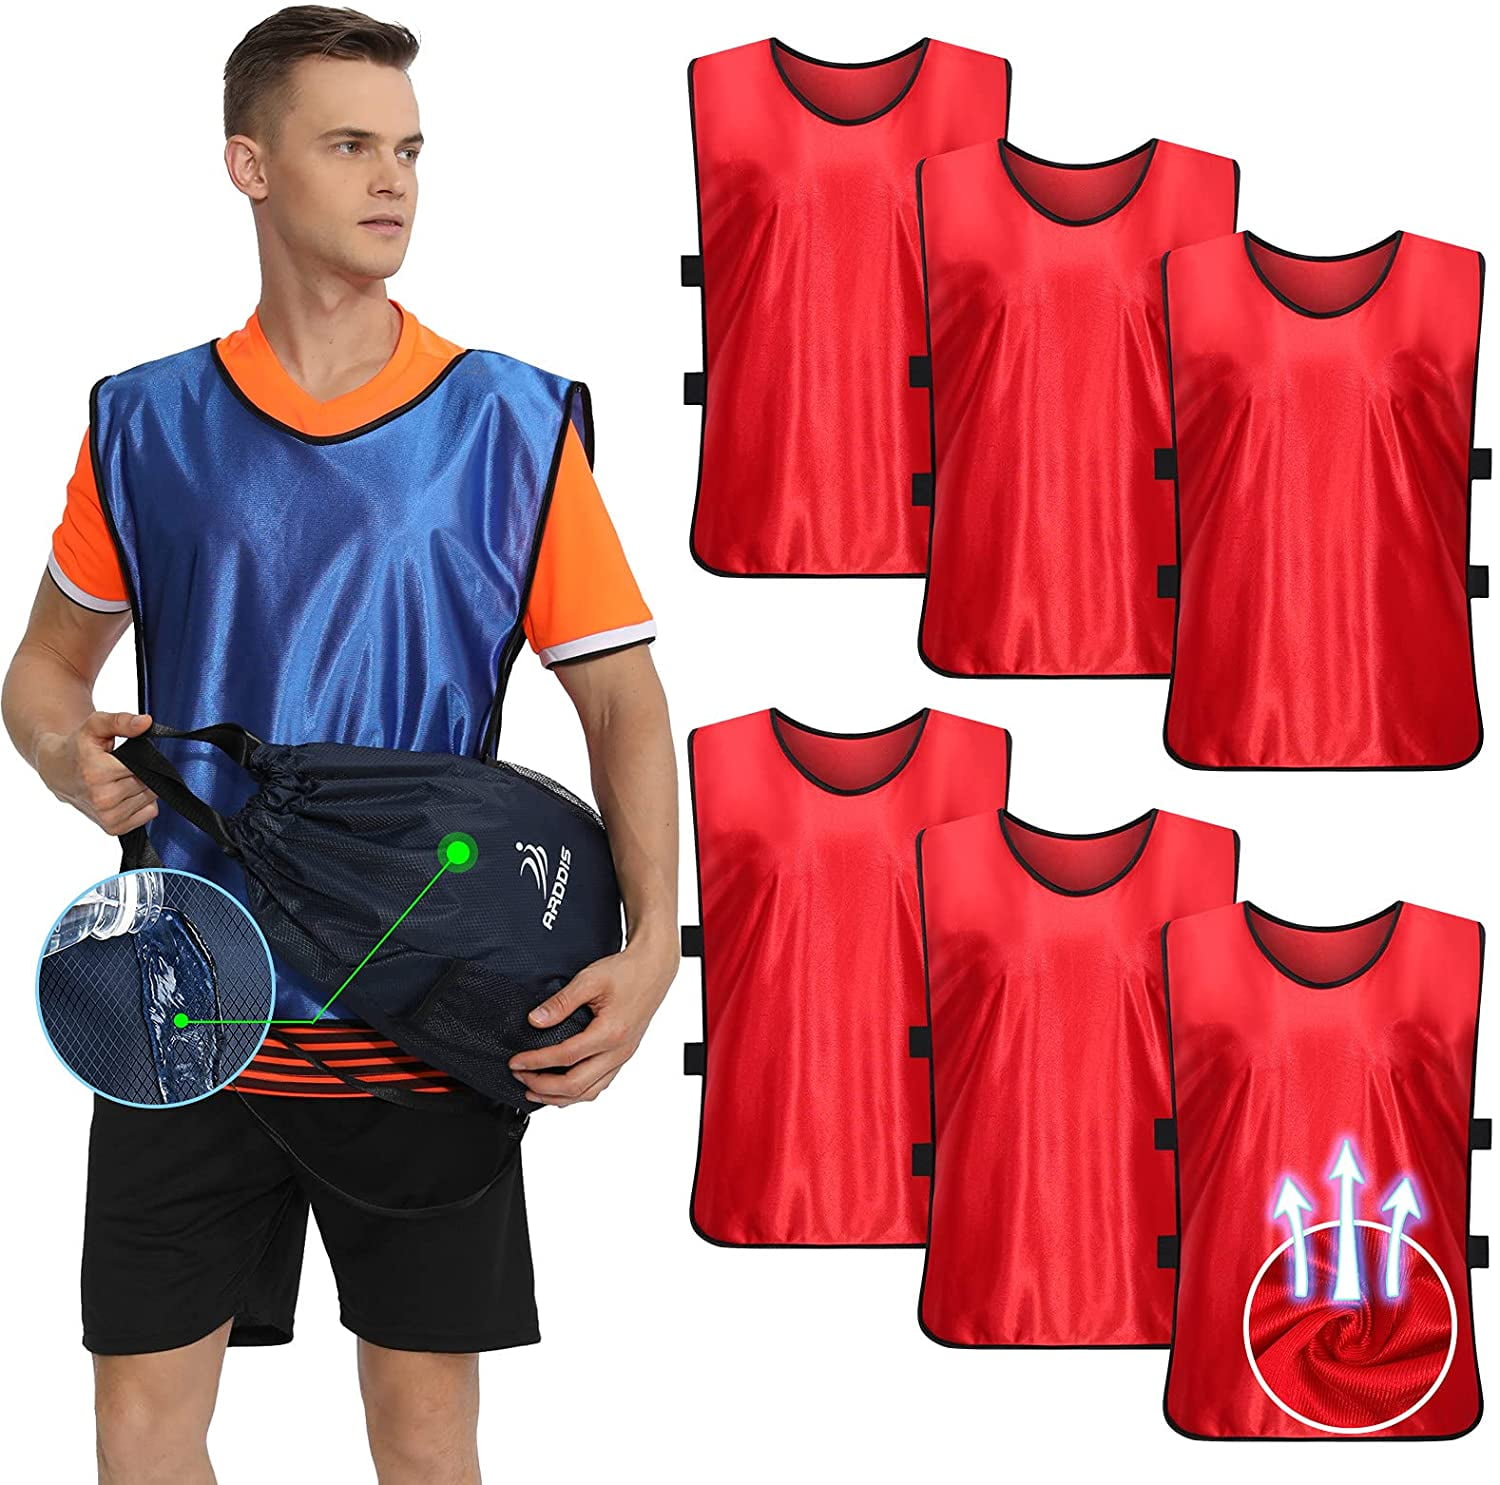 ARDDIS 6 Pack Pinnies Scrimmage Vests Jersey for Soccer Basketball Hockey Adult 